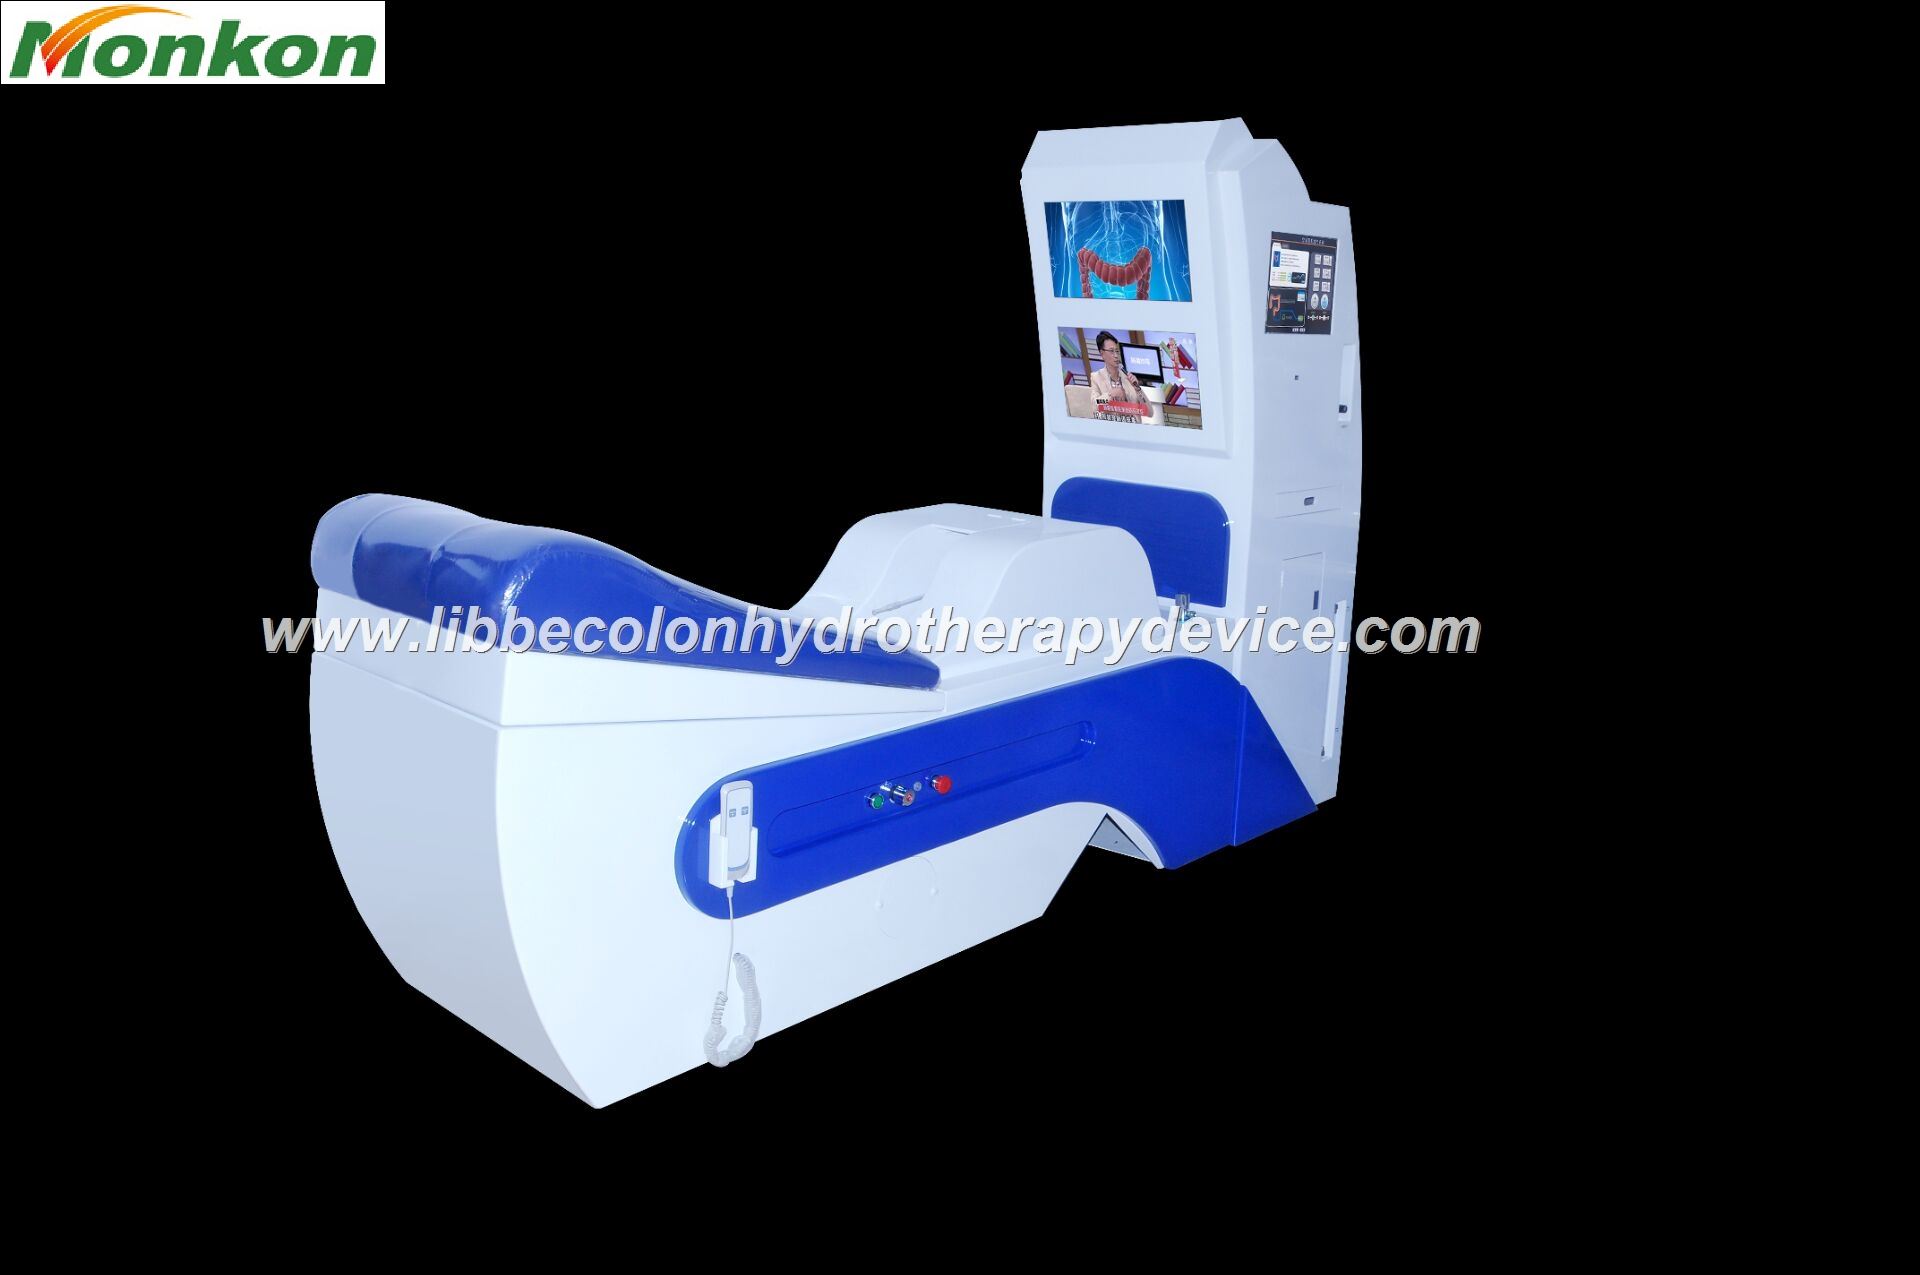 MAIKONG Colonic machine cost